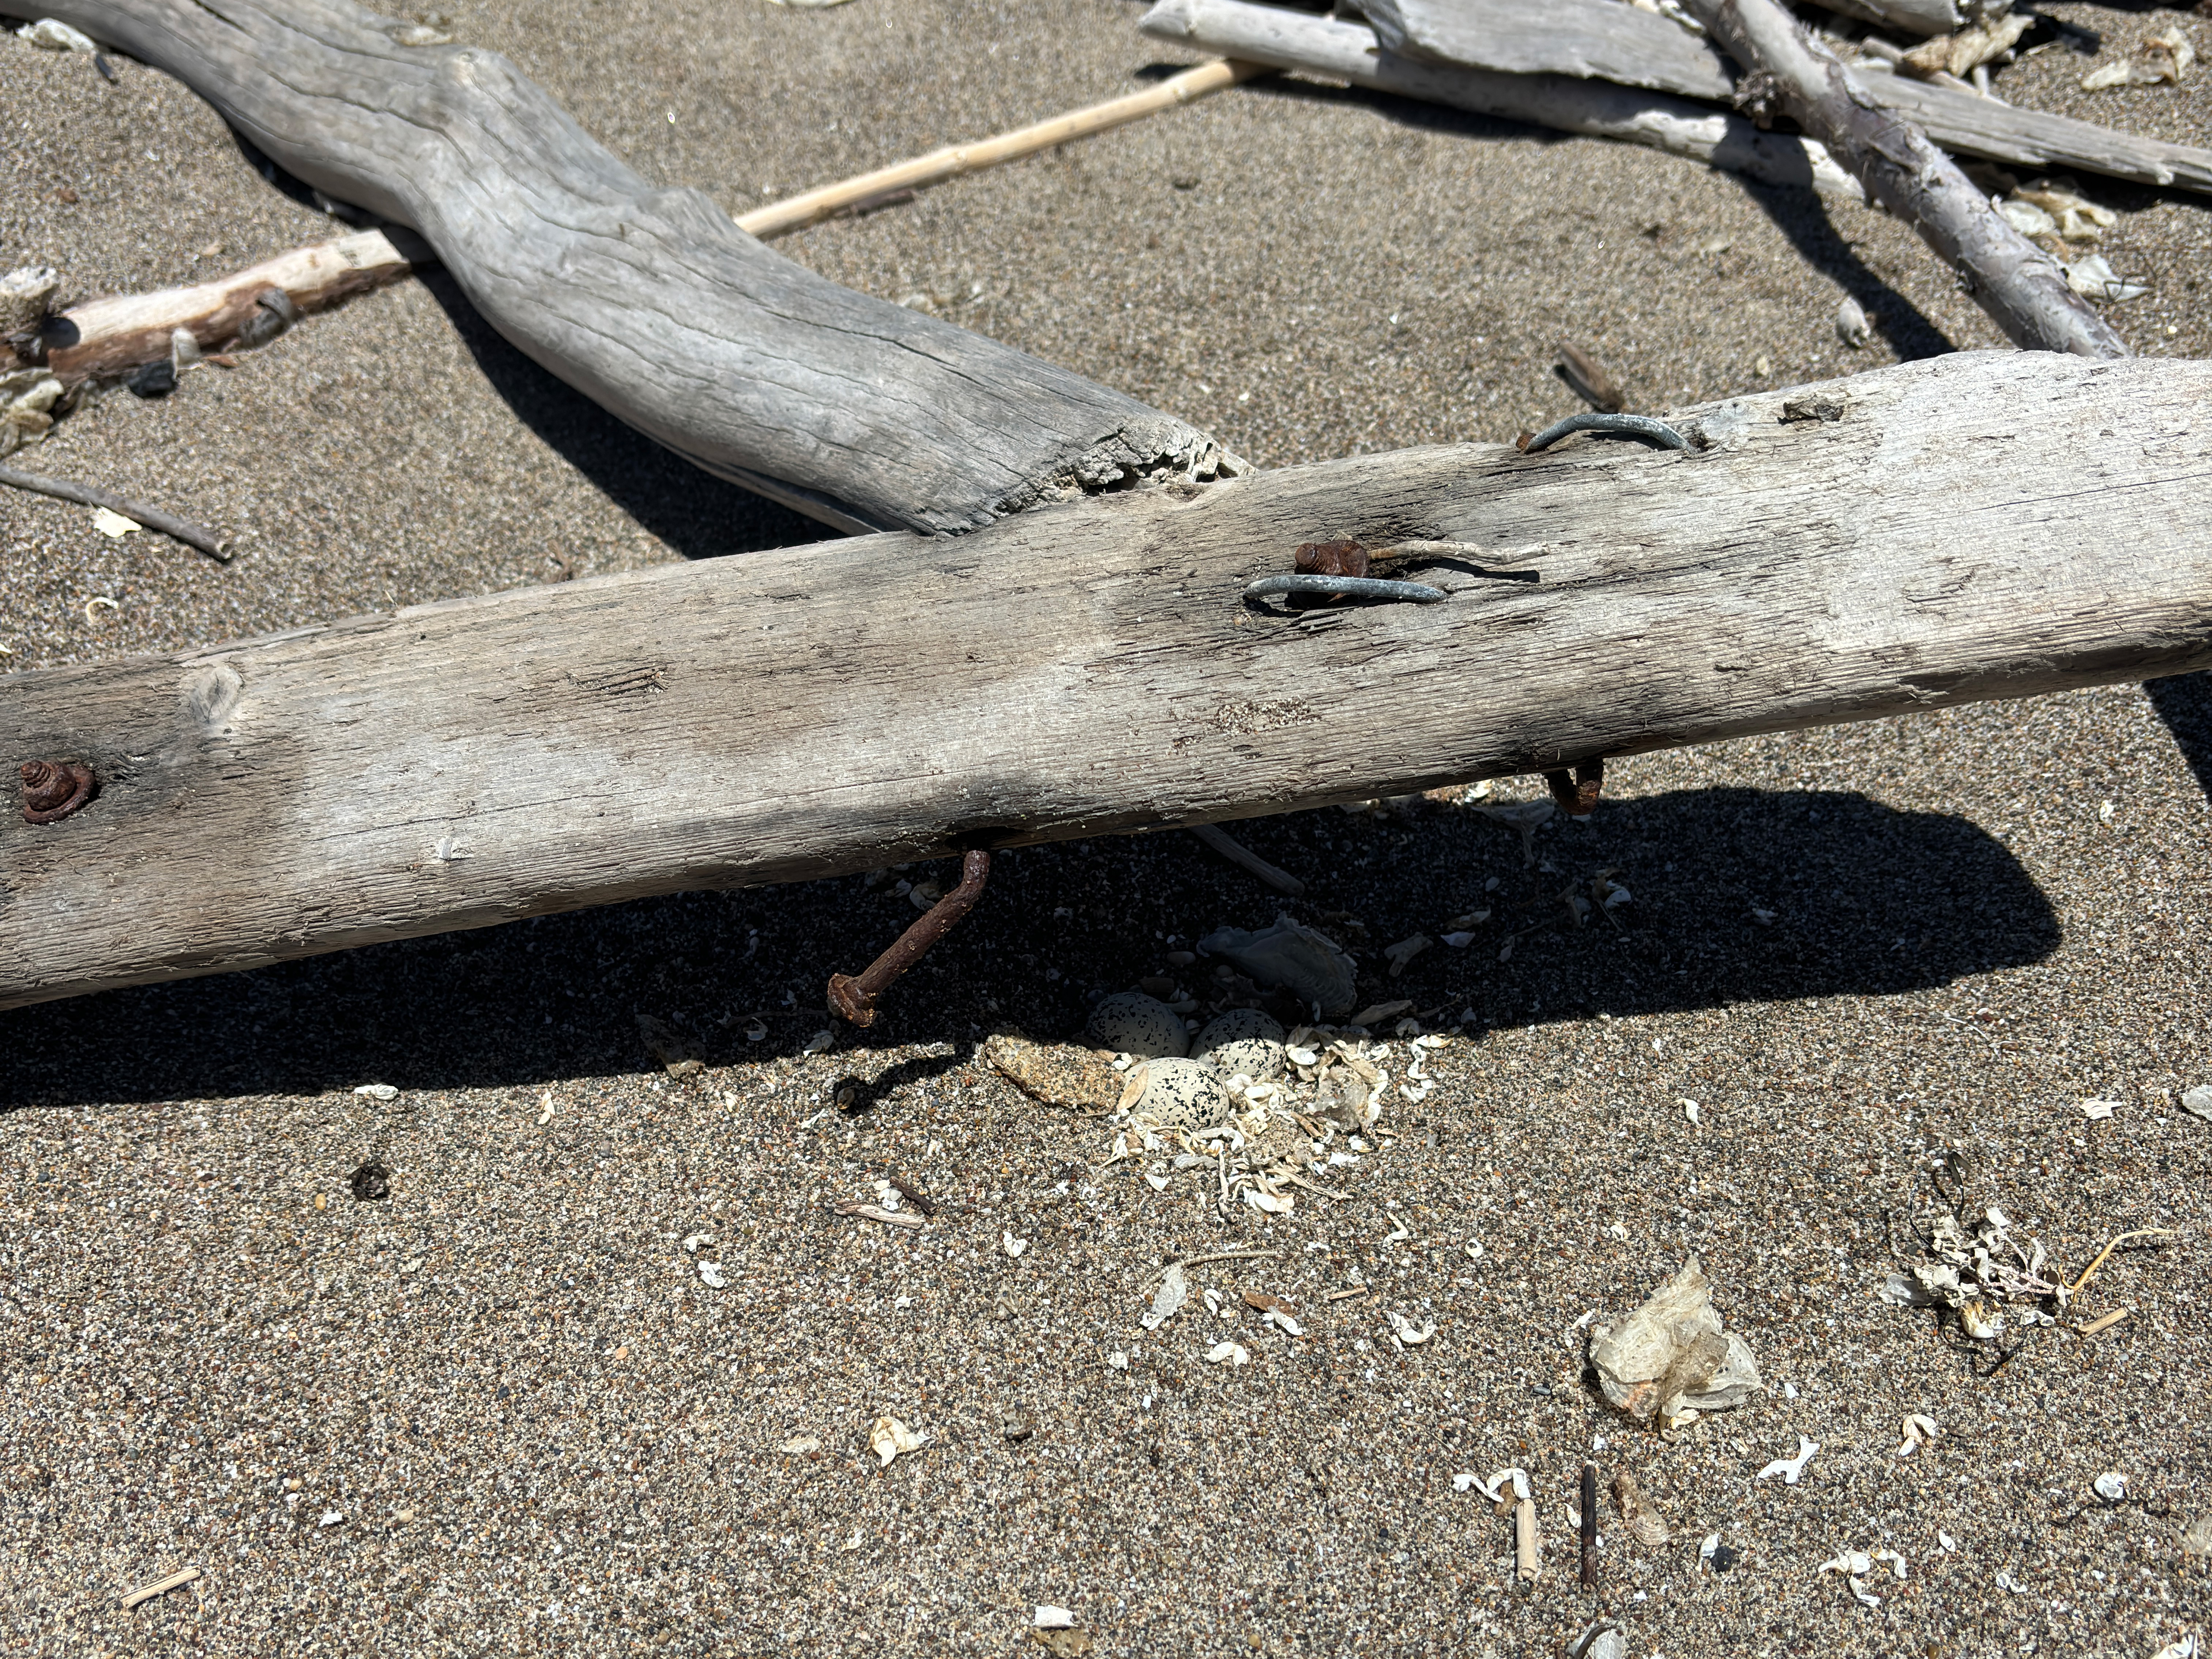 A photo of three small black-speckled, beige-colored egg sitting on sand under a piece of driftwood with multiple nails that's elevated above the sand.